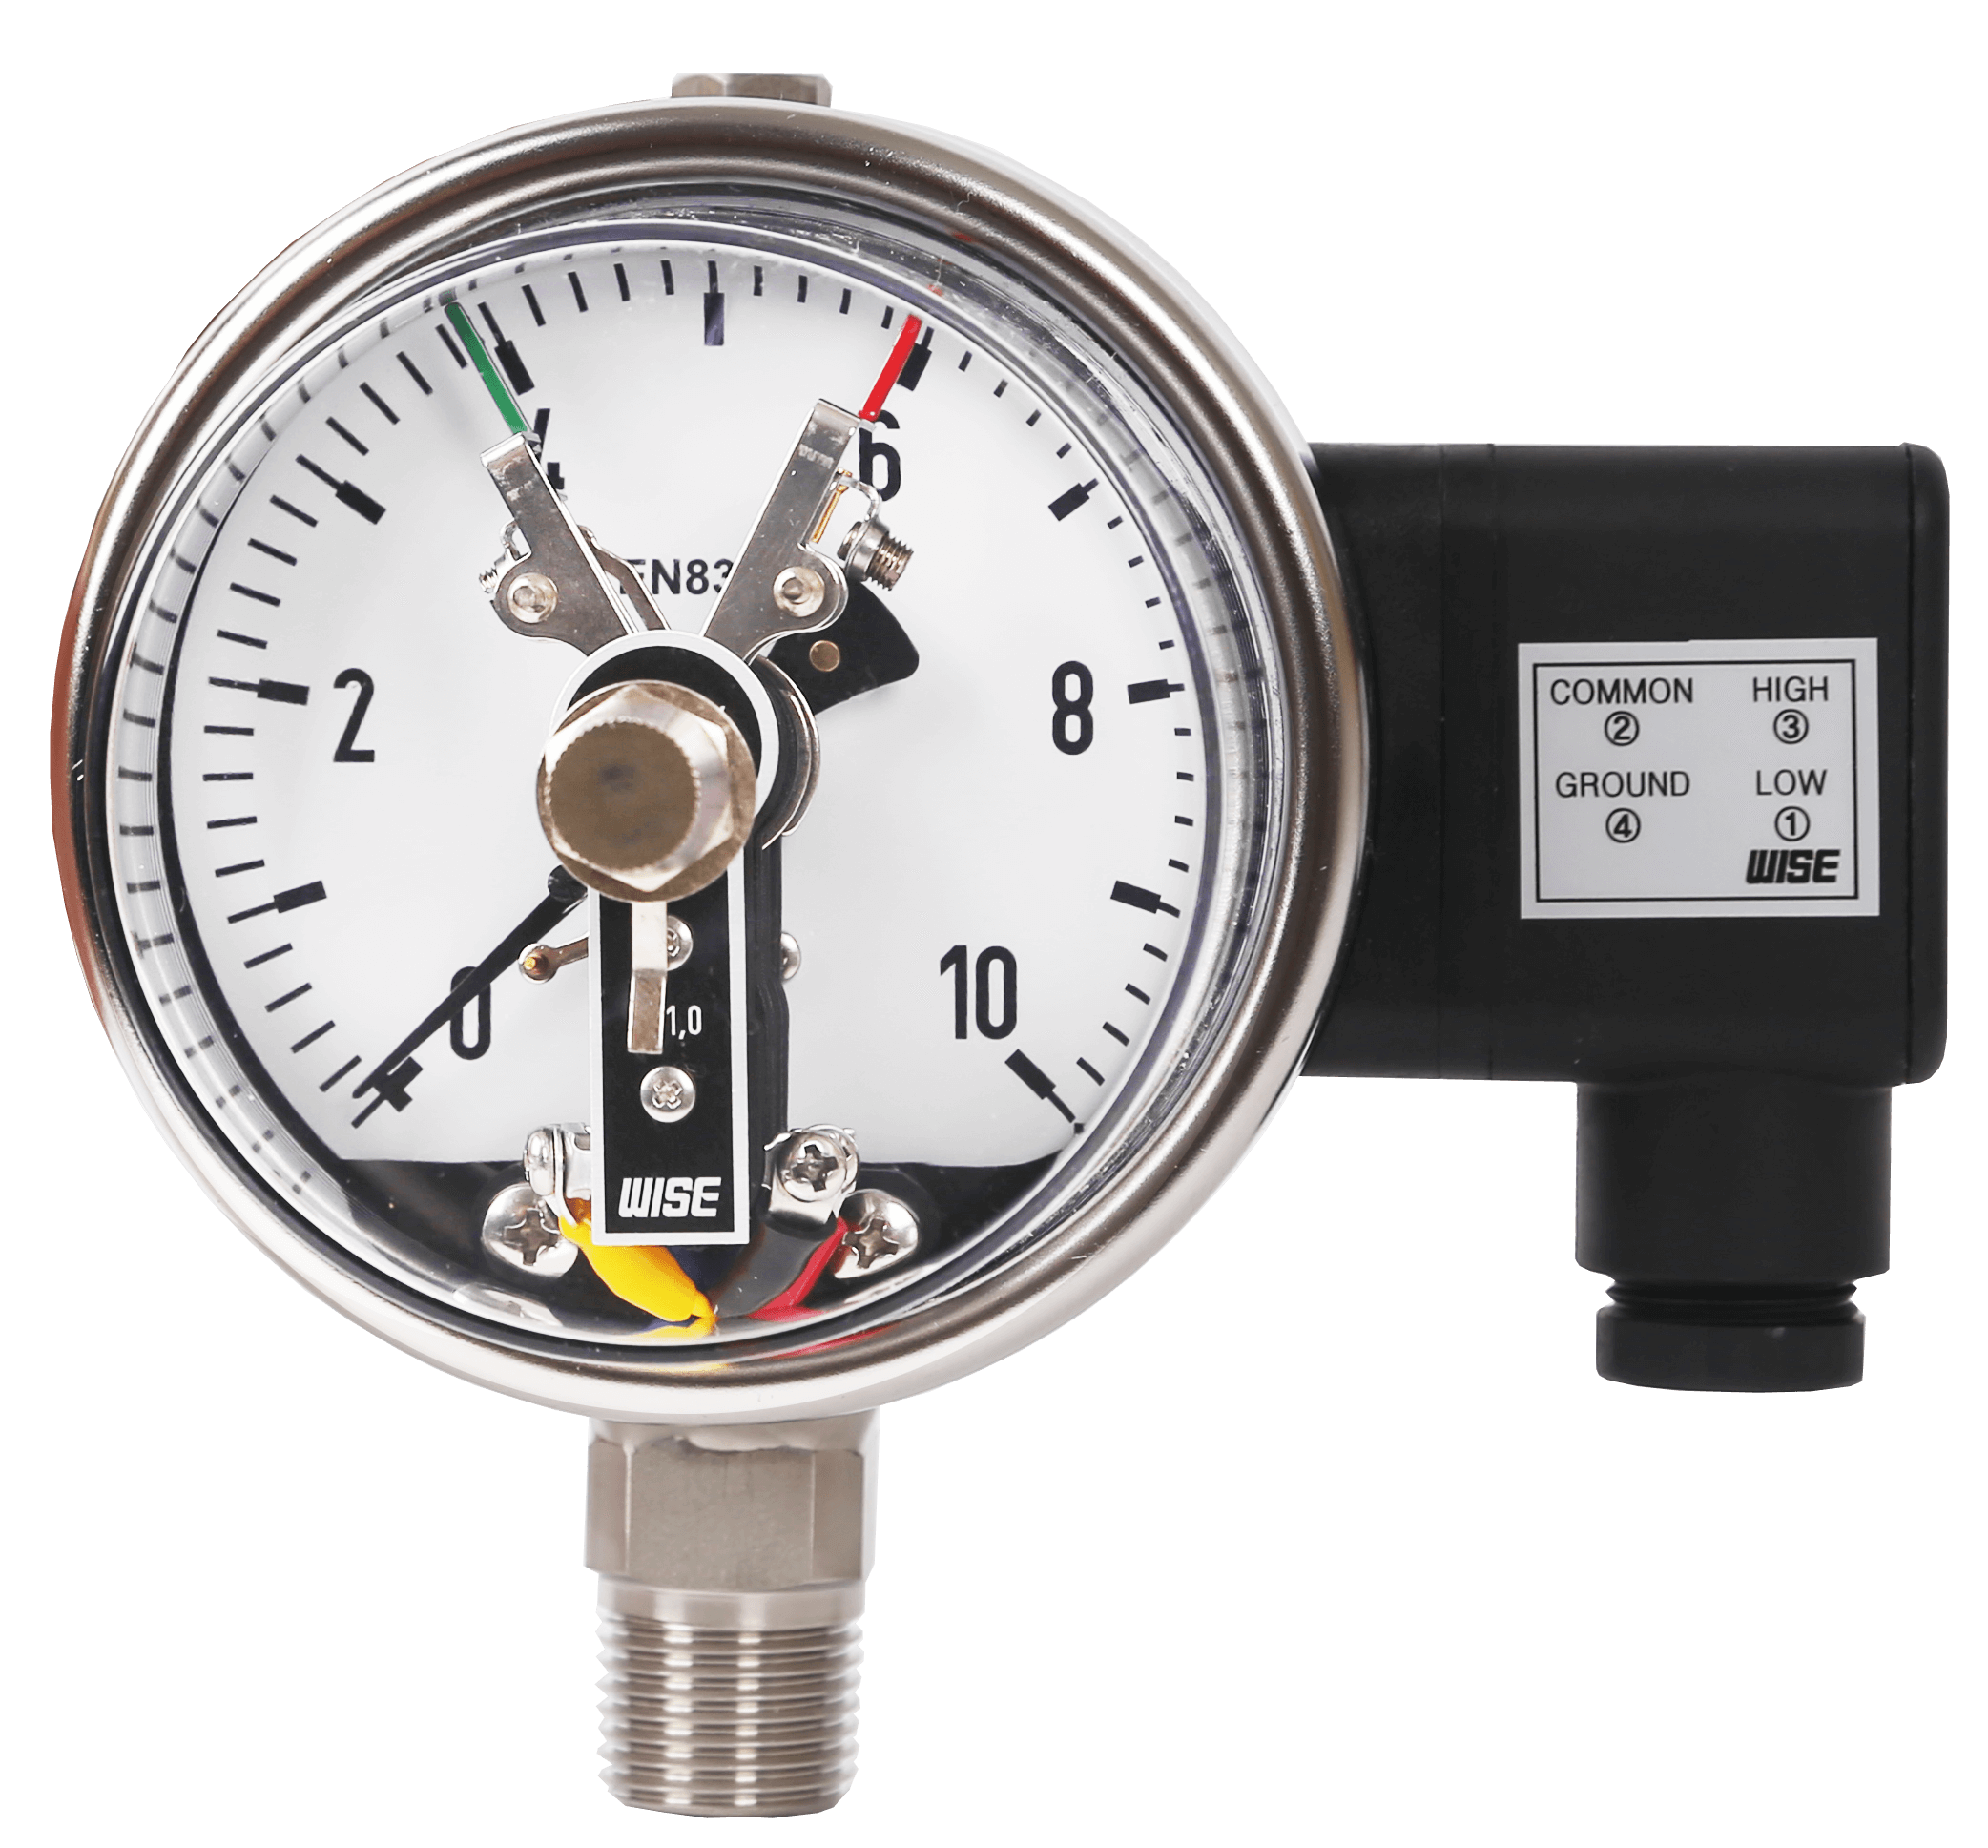 euro-gauge-electrical-contact-type-pressure-gauge-p5104a2edh05830-wise-control vietnam.png